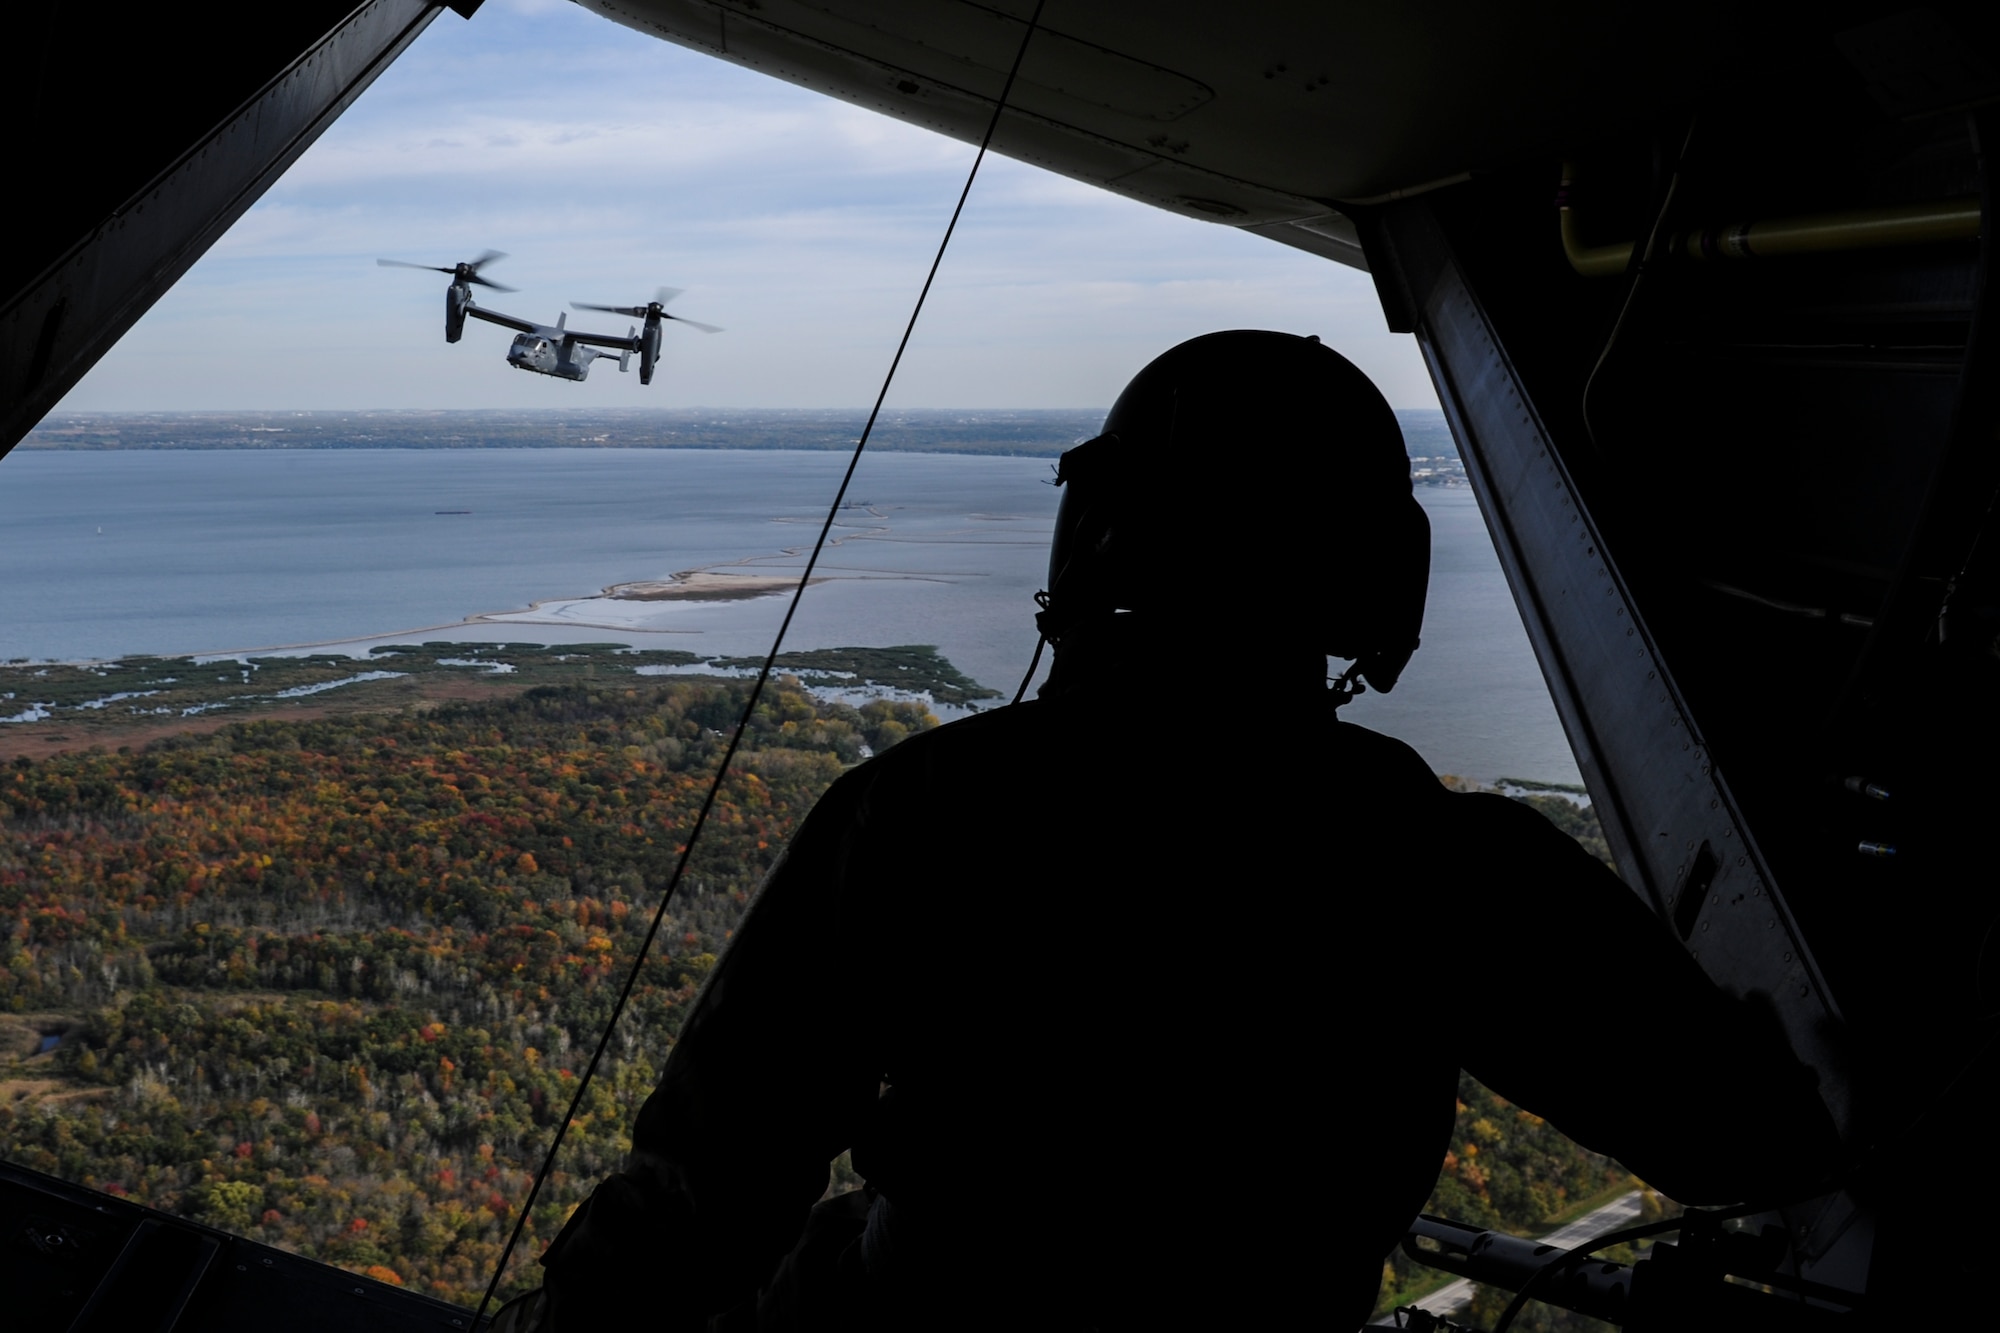 Staff Sgt. Dustin Trevino, a flight engineer with the 8th Special Operations Squadron, looks at a CV-22 Osprey tiltrotor aircraft over Green Bay, Wis., Oct. 14, 2016. The 8th SOS visited the Milwaukee-Green Bay area for a flyover above Lambeau Field Oct. 16 during the Green Bay versus Dallas NFL game. The Osprey offers increased speed and range over other rotary-wing aircraft, enabling Air Force Special Operations Command aircrews to execute long-range special operations missions. (U.S. Air Force photo by Airman 1st Class Joseph Pick)